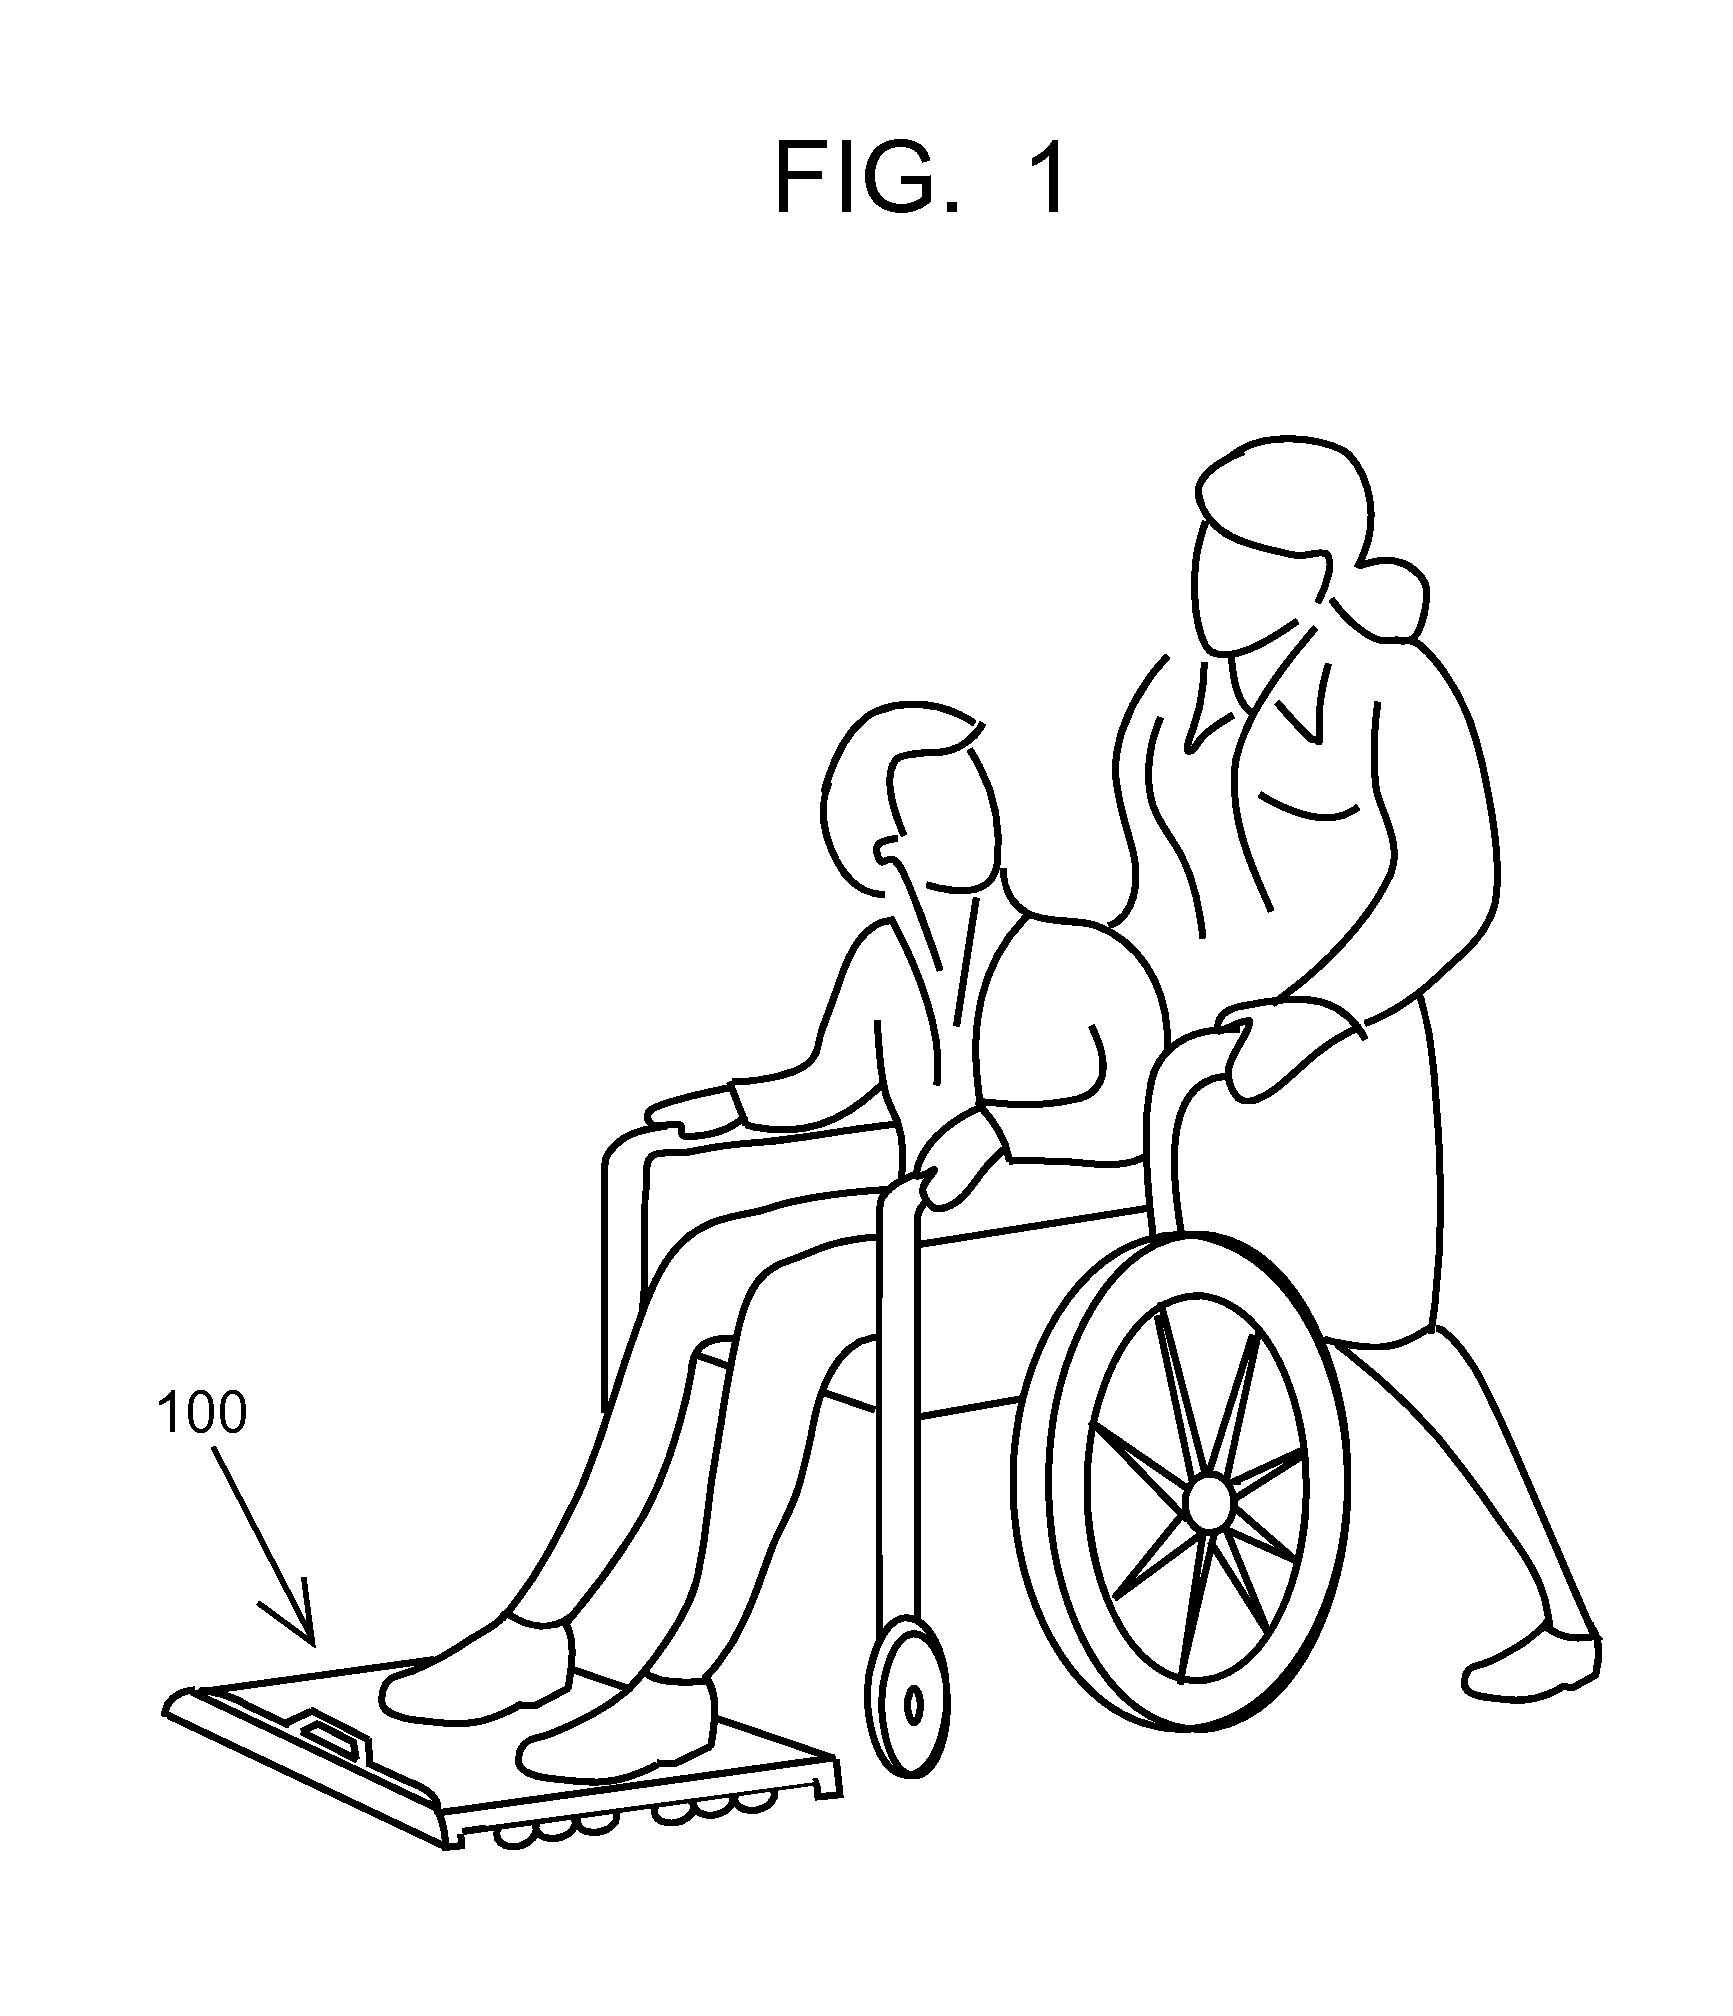 Apparatus and Method for Transporting a Patient in a Wheelchair